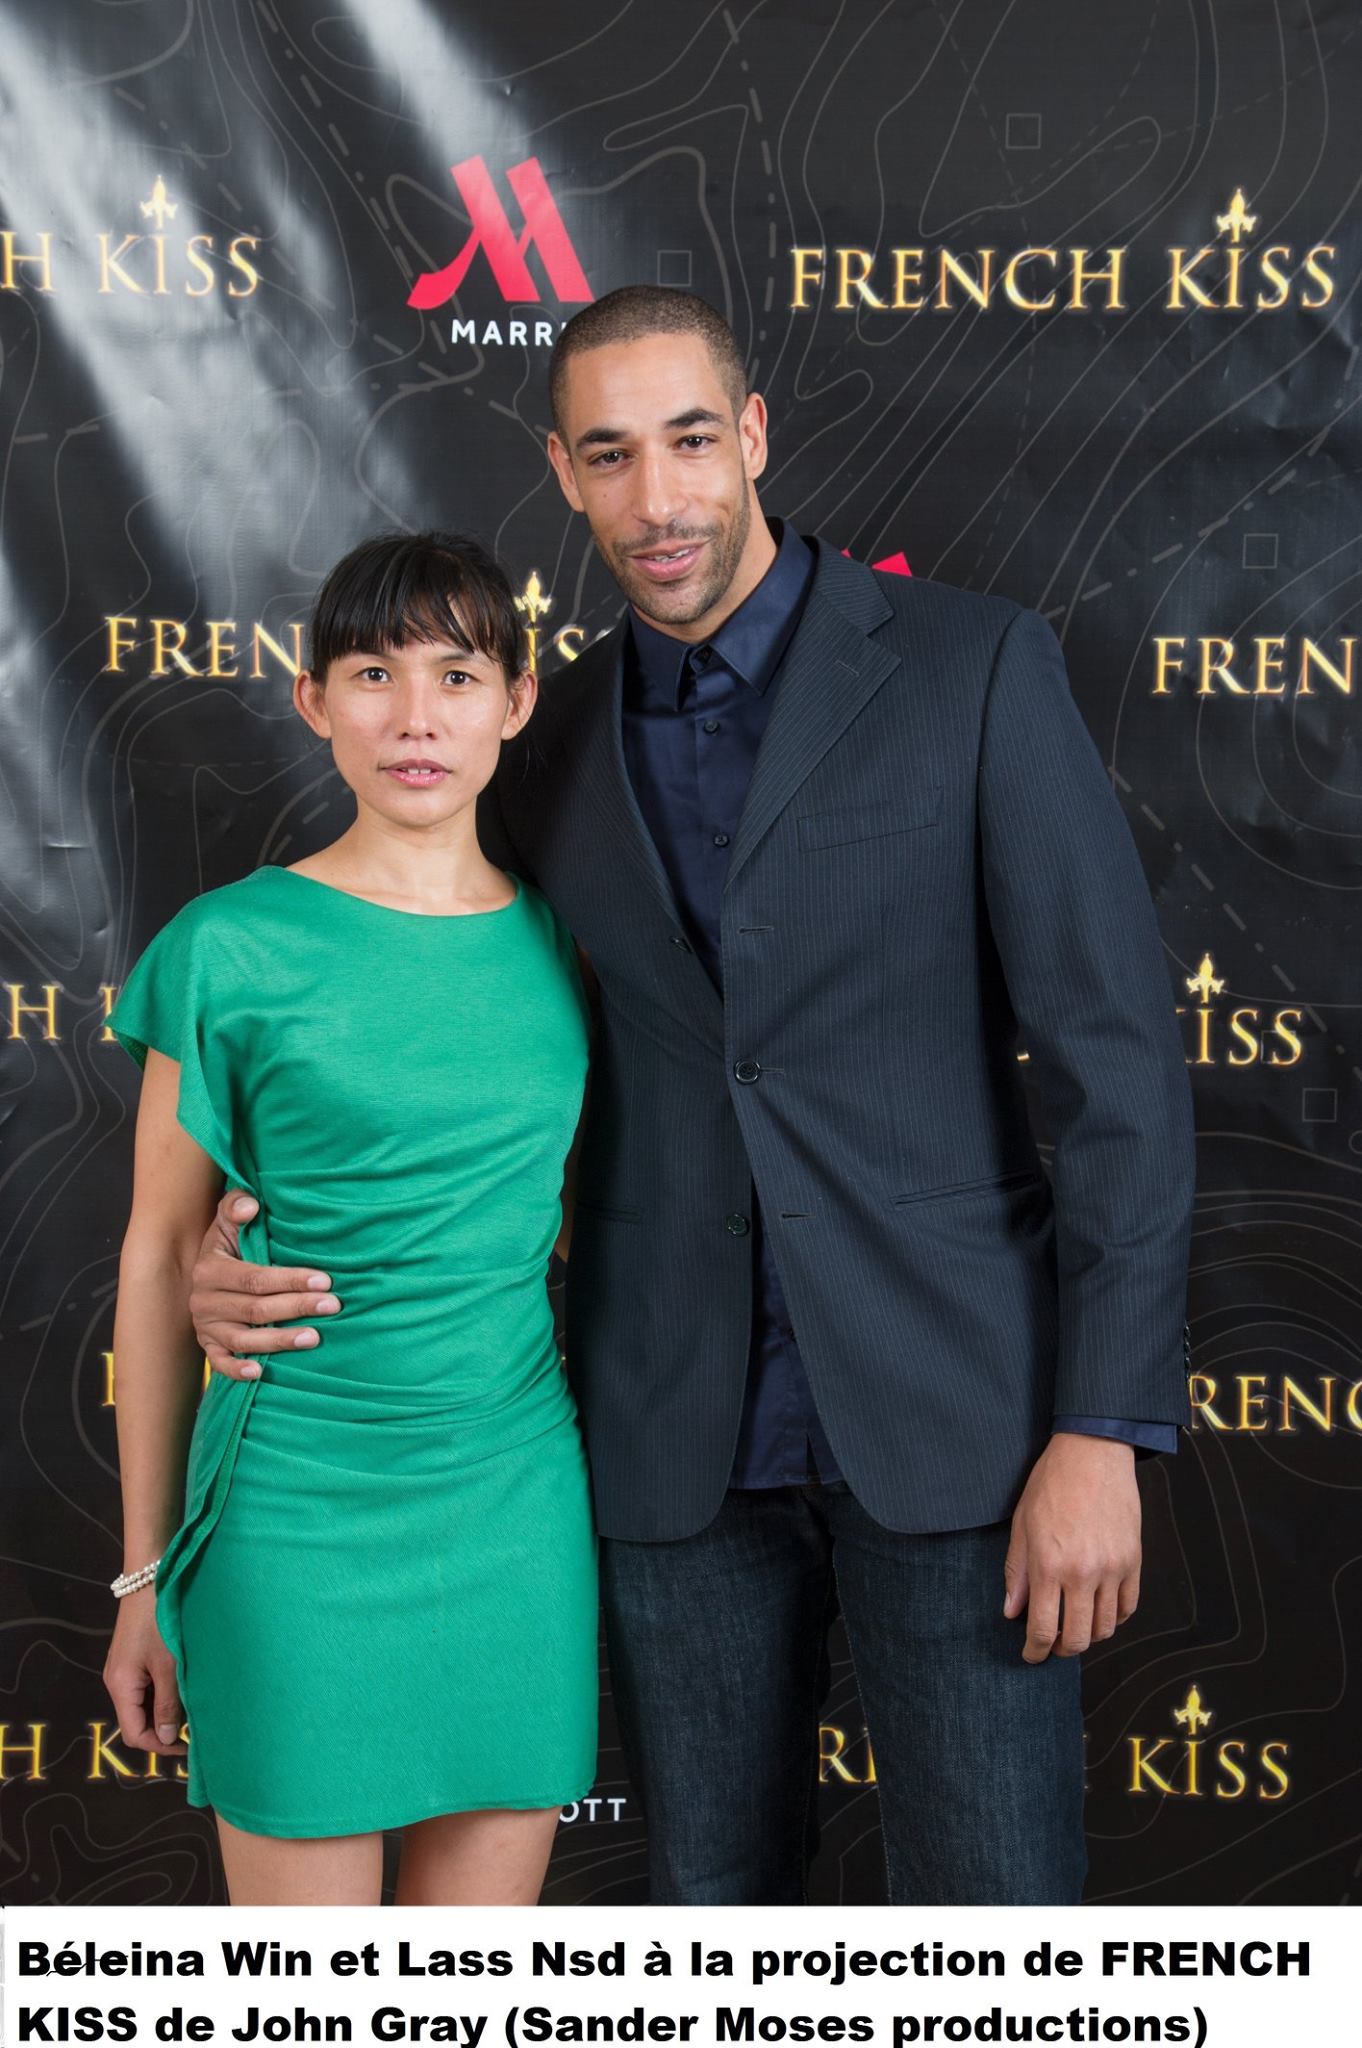 Beleina Win and Lassana Lestin at the French Kiss Premiere at the Marriott Champs Elysees